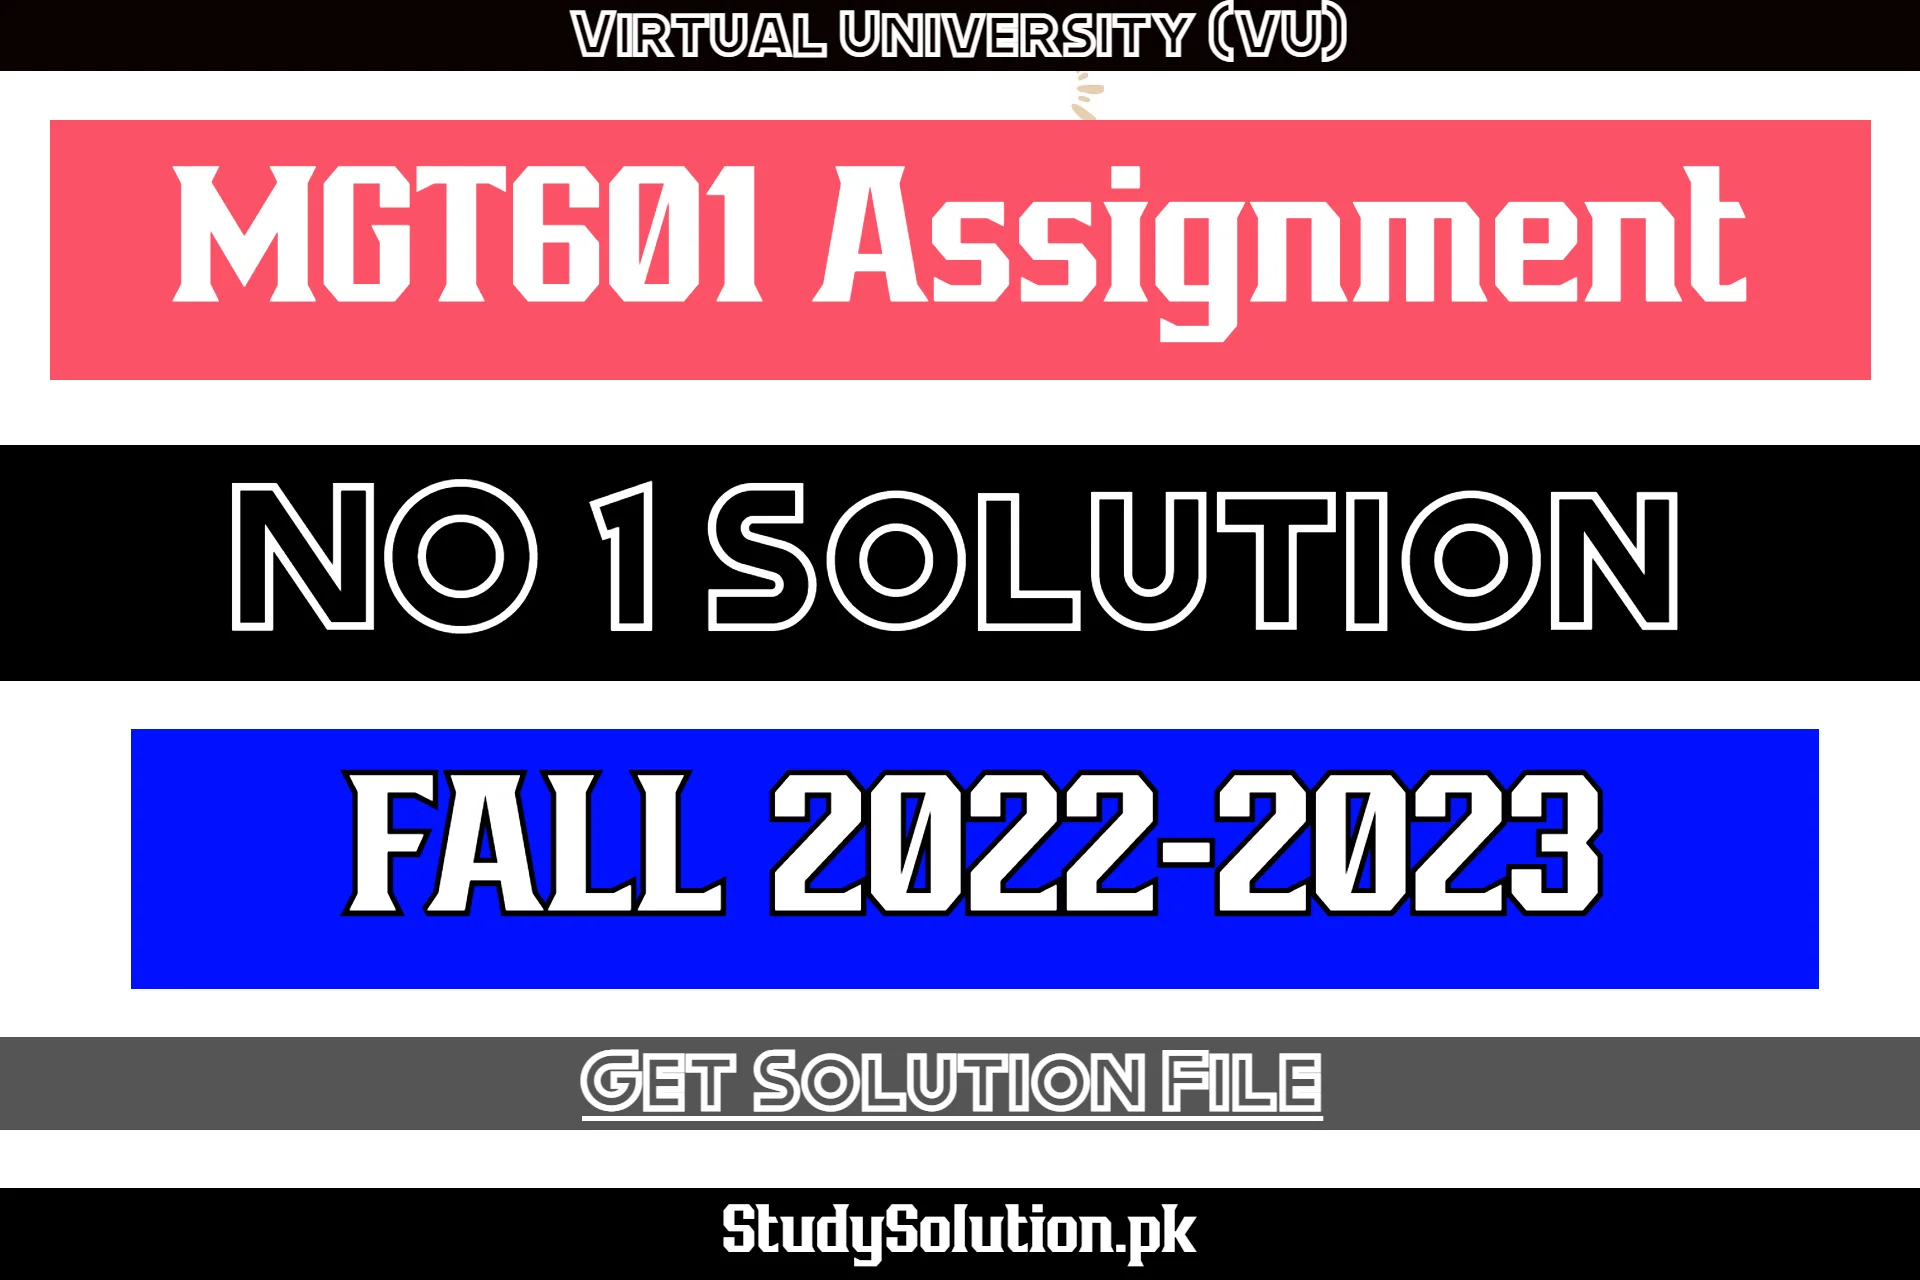 MGT601 Assignment No 1 Solution Fall 2022